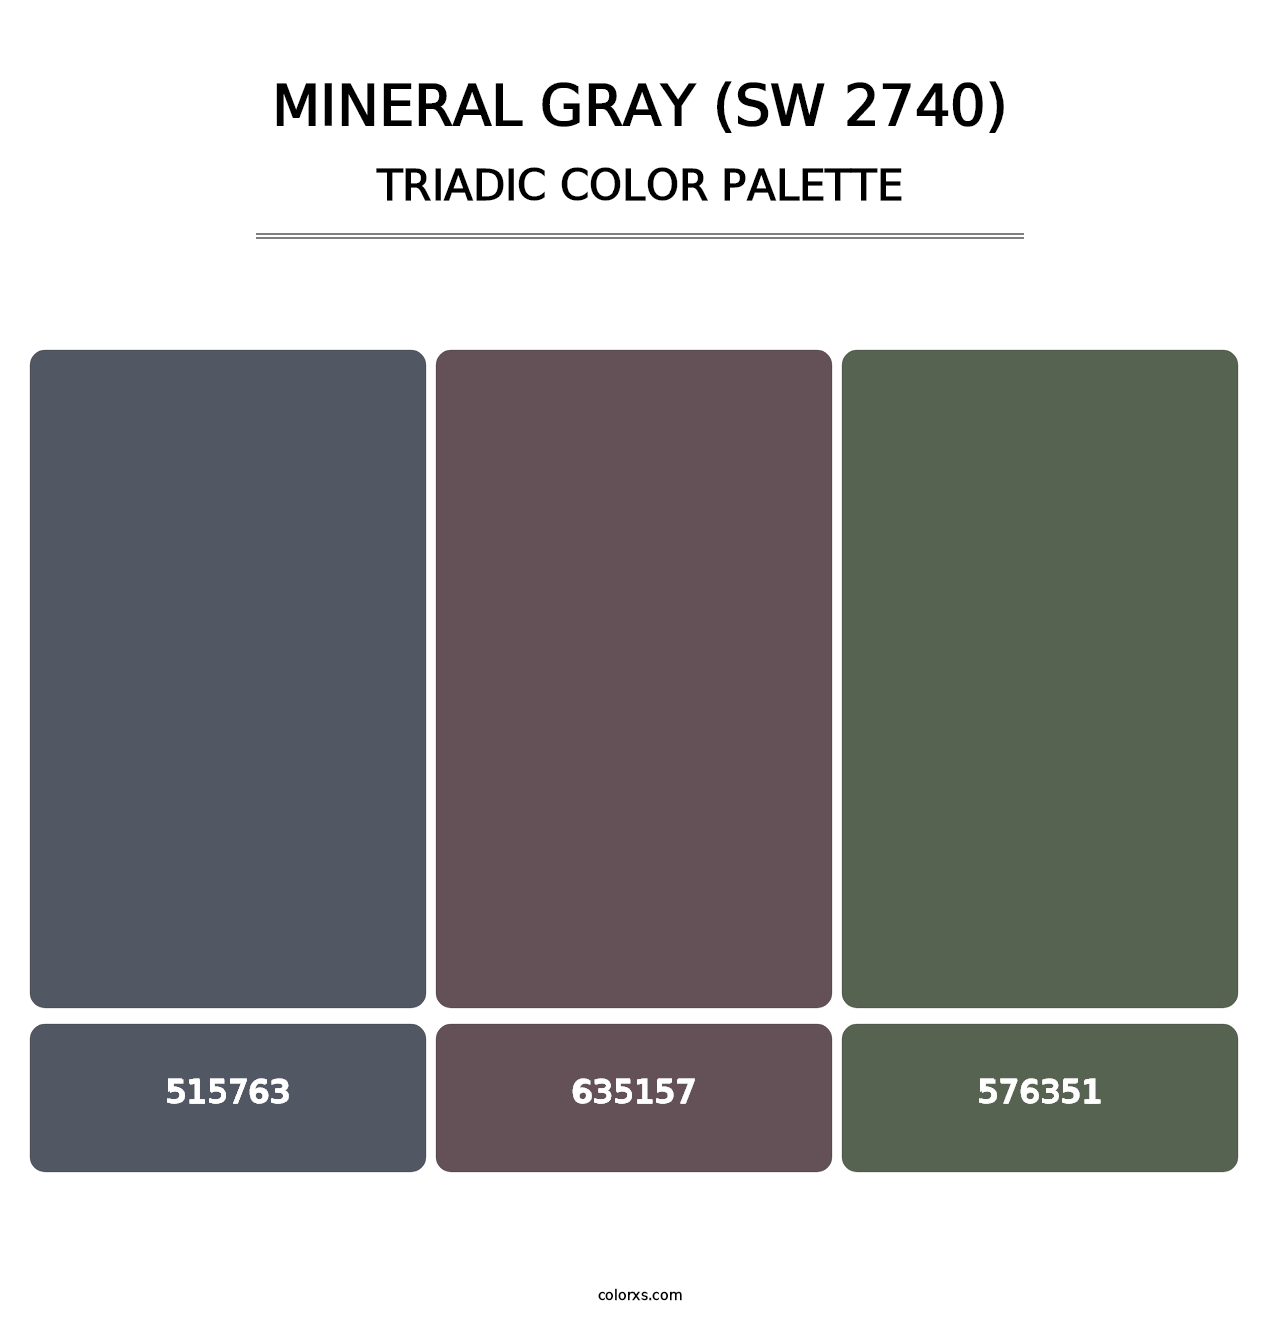 Mineral Gray (SW 2740) - Triadic Color Palette